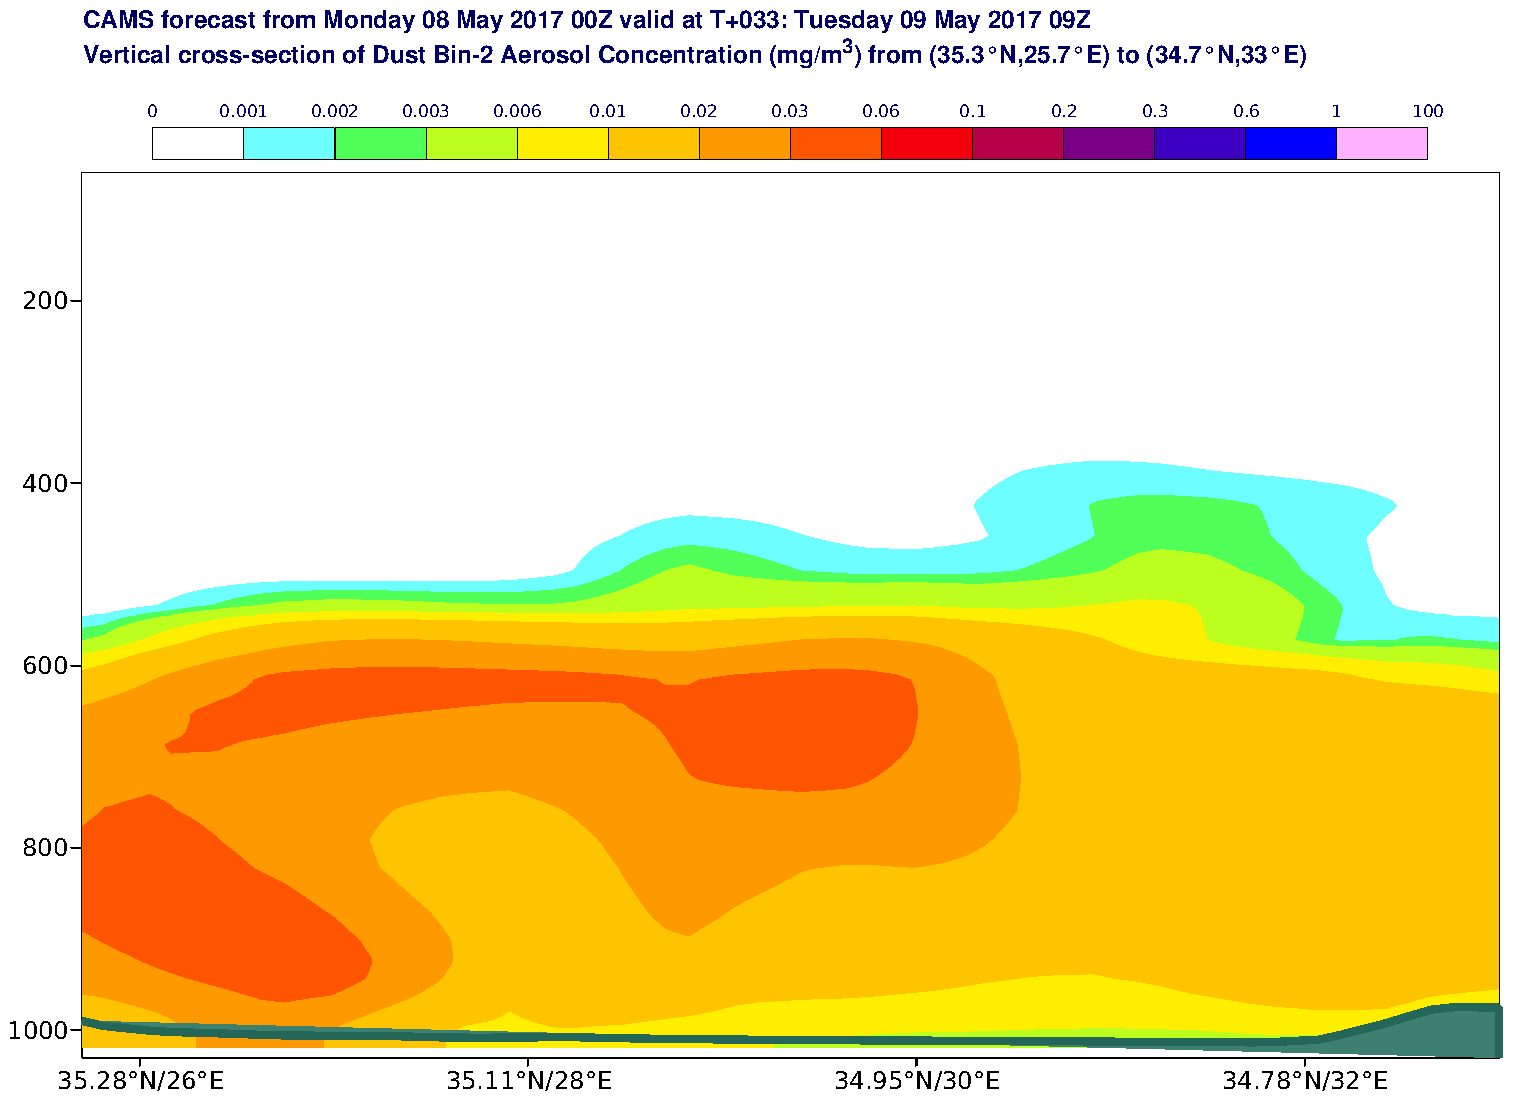 Vertical cross-section of Dust Bin-2 Aerosol Concentration (mg/m3) valid at T33 - 2017-05-09 09:00